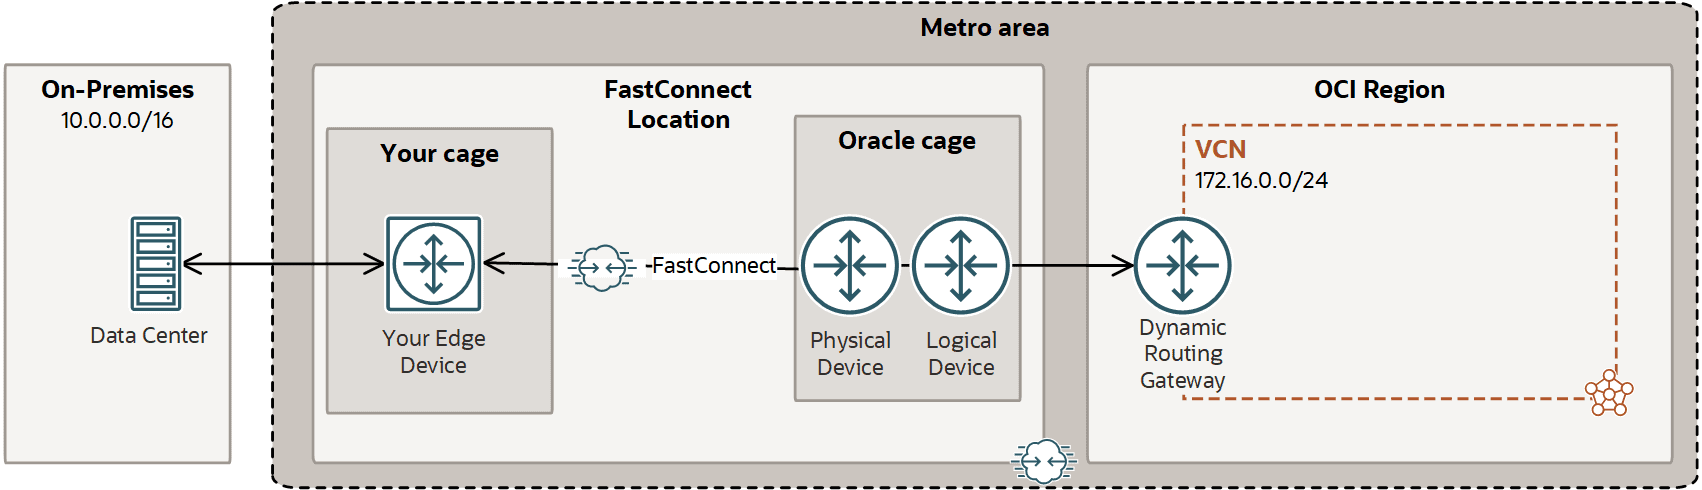 FastConnect Connection In OCI